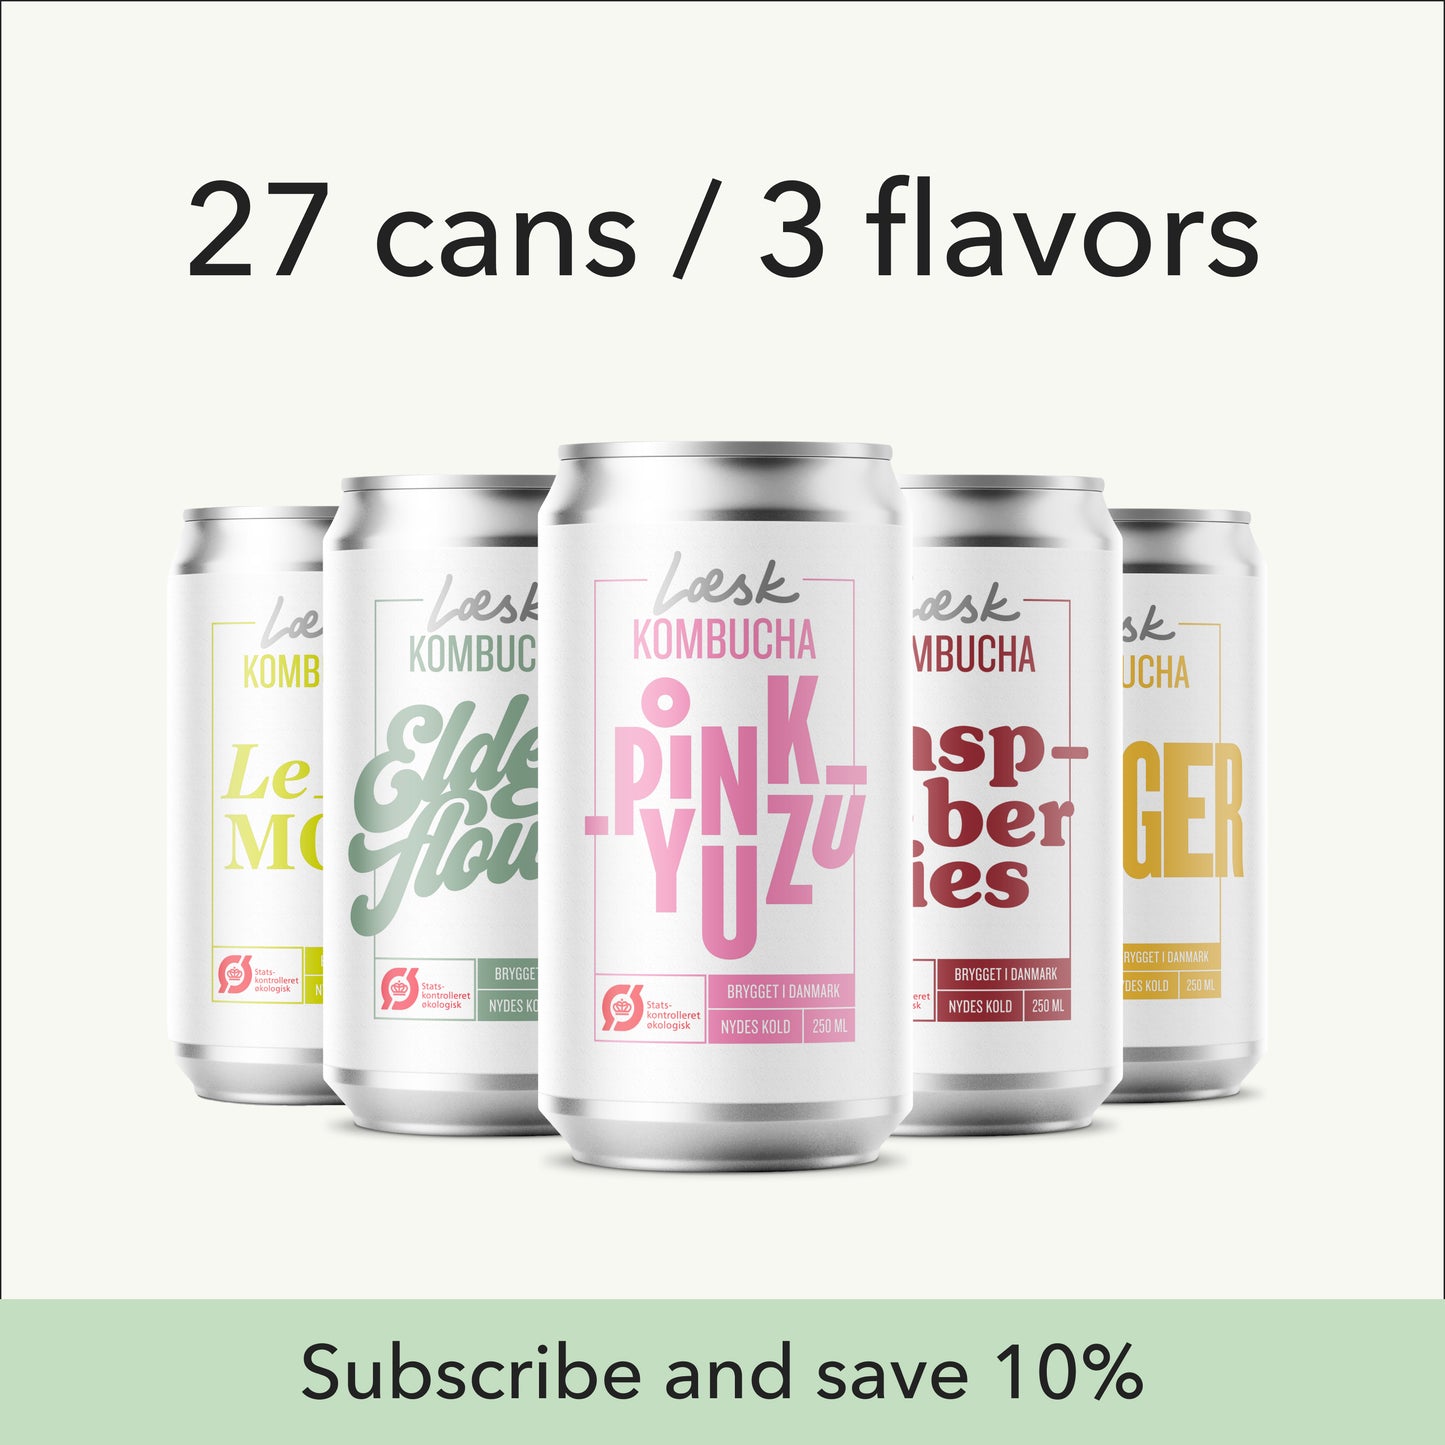 27 cans / 3 flavors